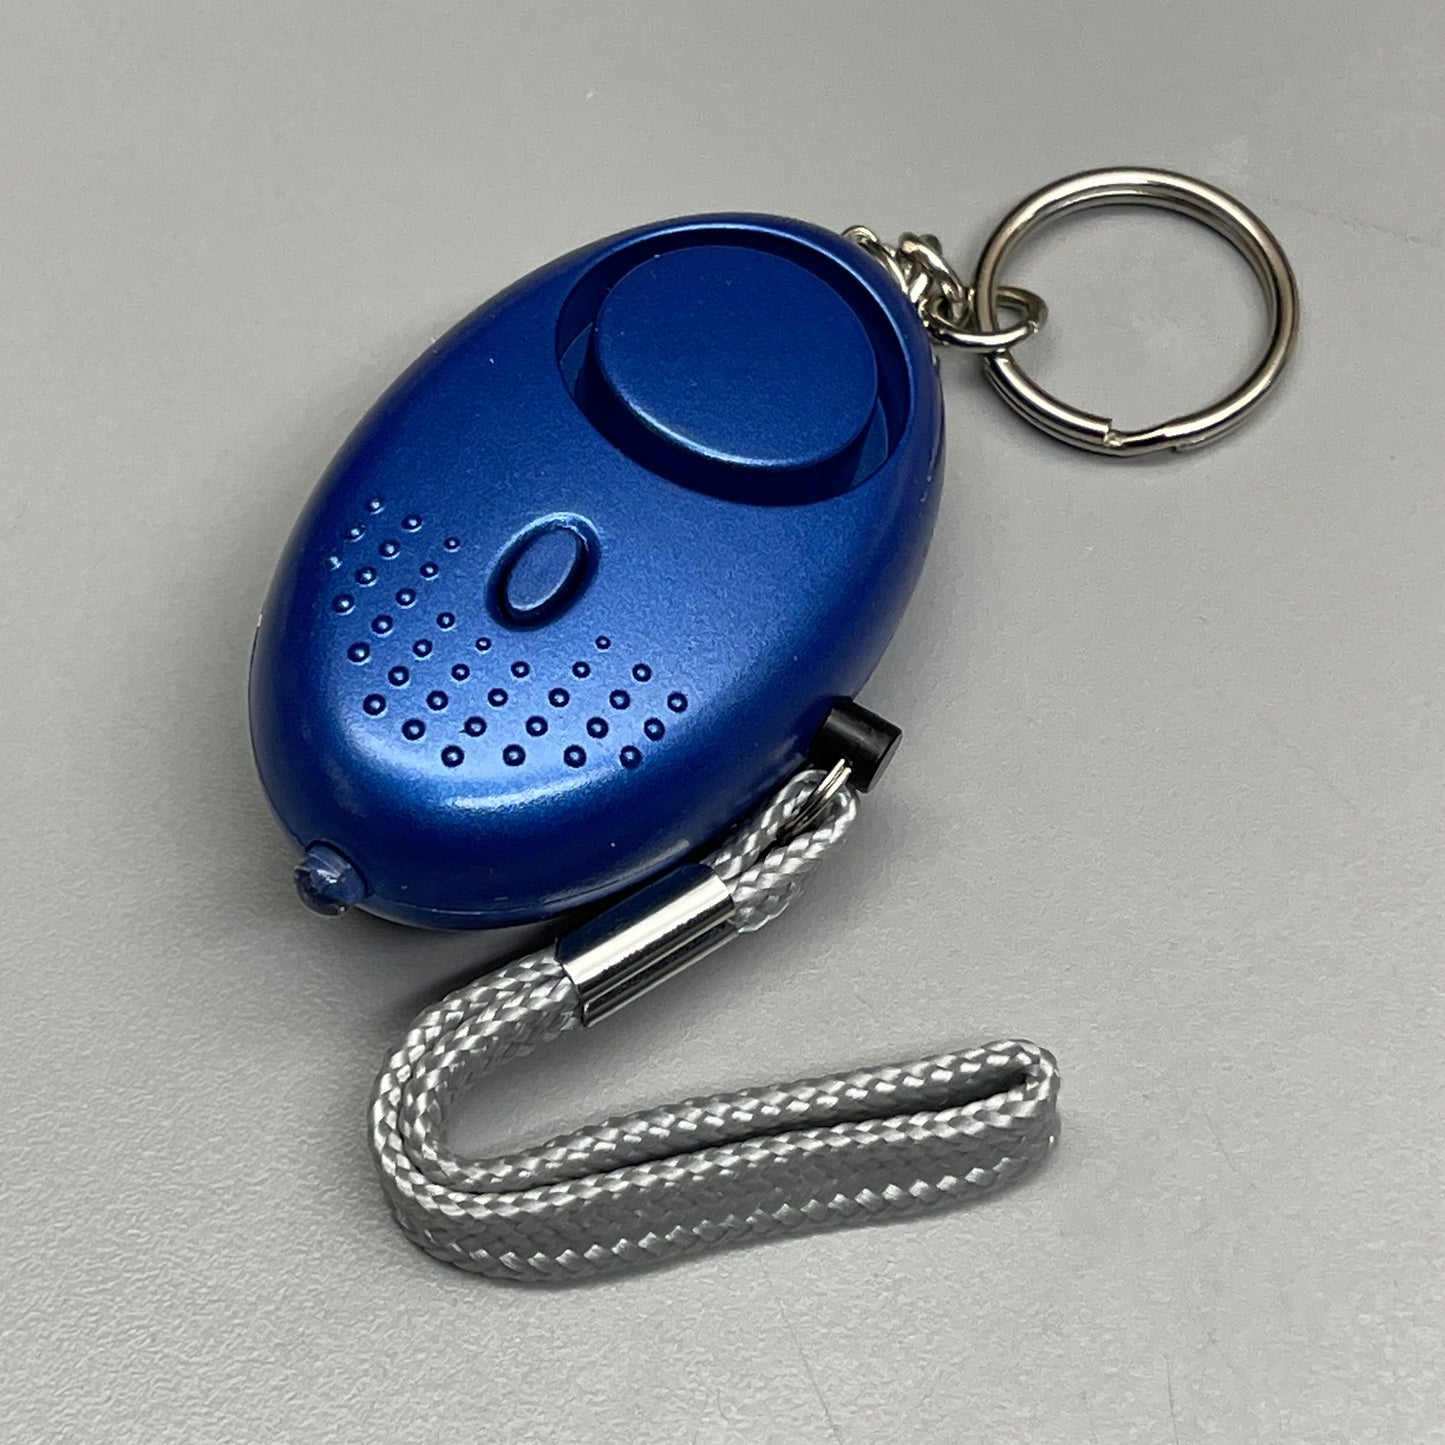 5-PACK! Personal Alarm Keychain Emergency Self Defense Alarm With LED Light Blue (New)